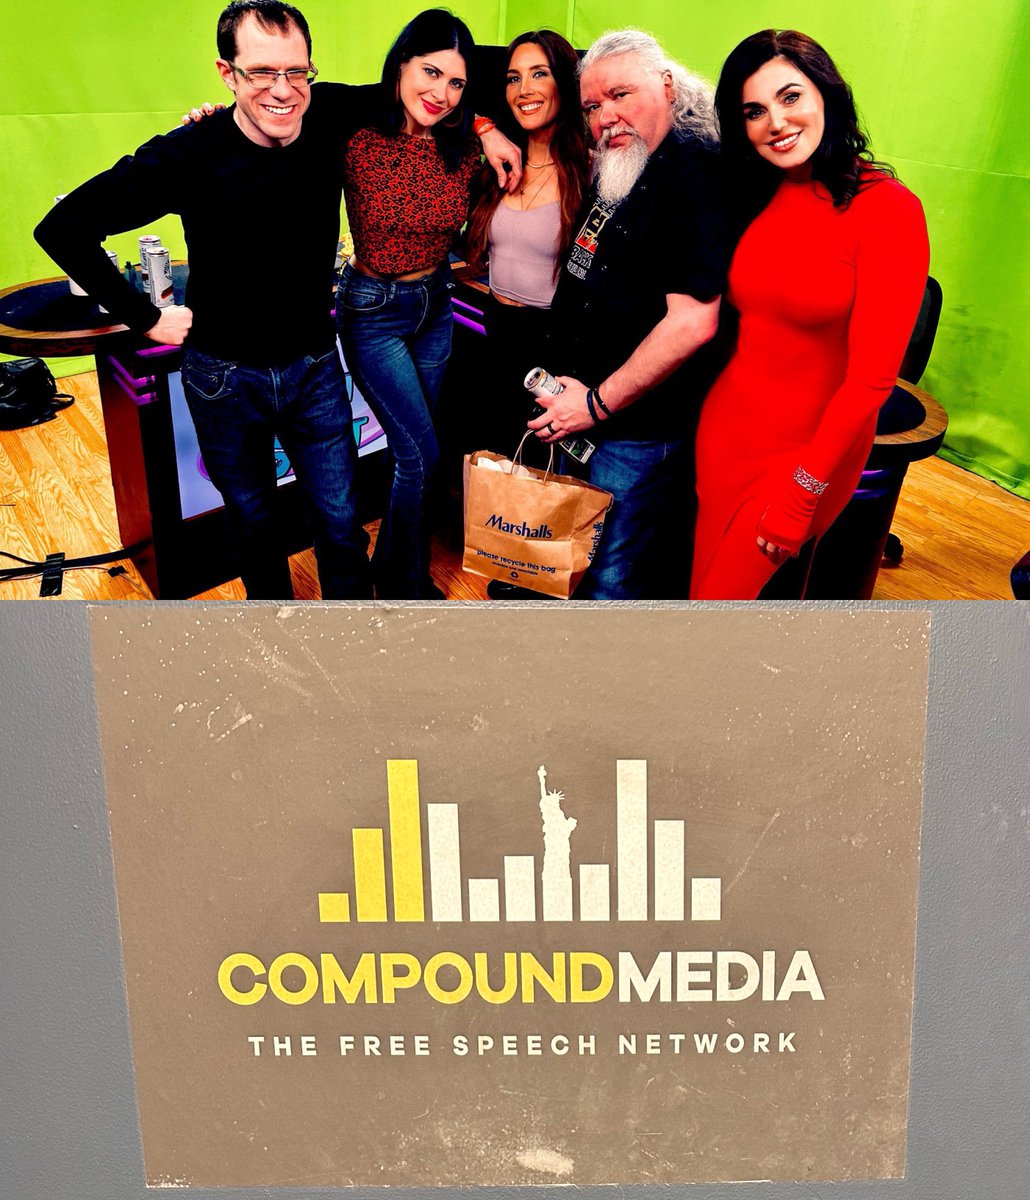 That was so fun! Loved laughing with this hilarious bunch. Check out the show at compoundmedia.com/shows/wet-spot , friends. @CompoundAmerica @ChrissieMayr @KristenCarney @satanscomic @andrewlharms @Thurdeye @drewmagner @keanuCthompson @FrankP614